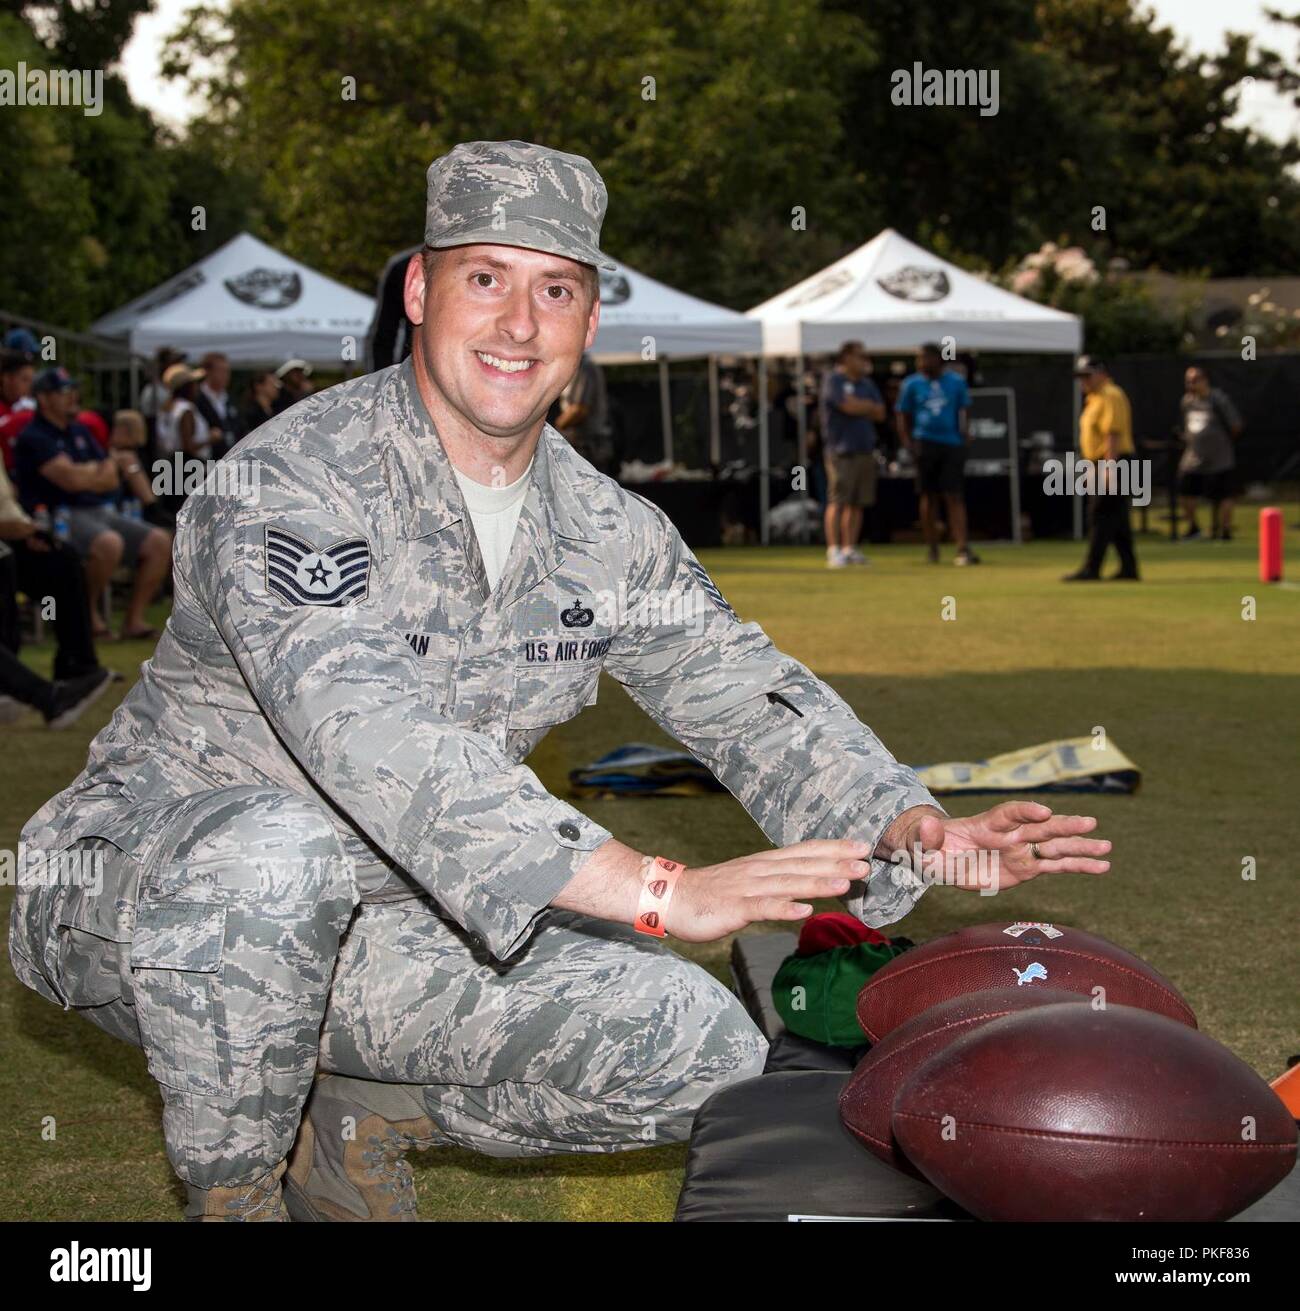 U.S. Air Force Tech. Sgt. James Hodgman, 60th Air Mobility Wing, poses with footballs during Oakland Raiders training camp in Napa Valley, Calif., August 7, 2018. Travis Airmen were treated to a scrimmage between the Raiders and Detroit Lions and a meet and greet autograph session with players and coaches from both teams. Stock Photo